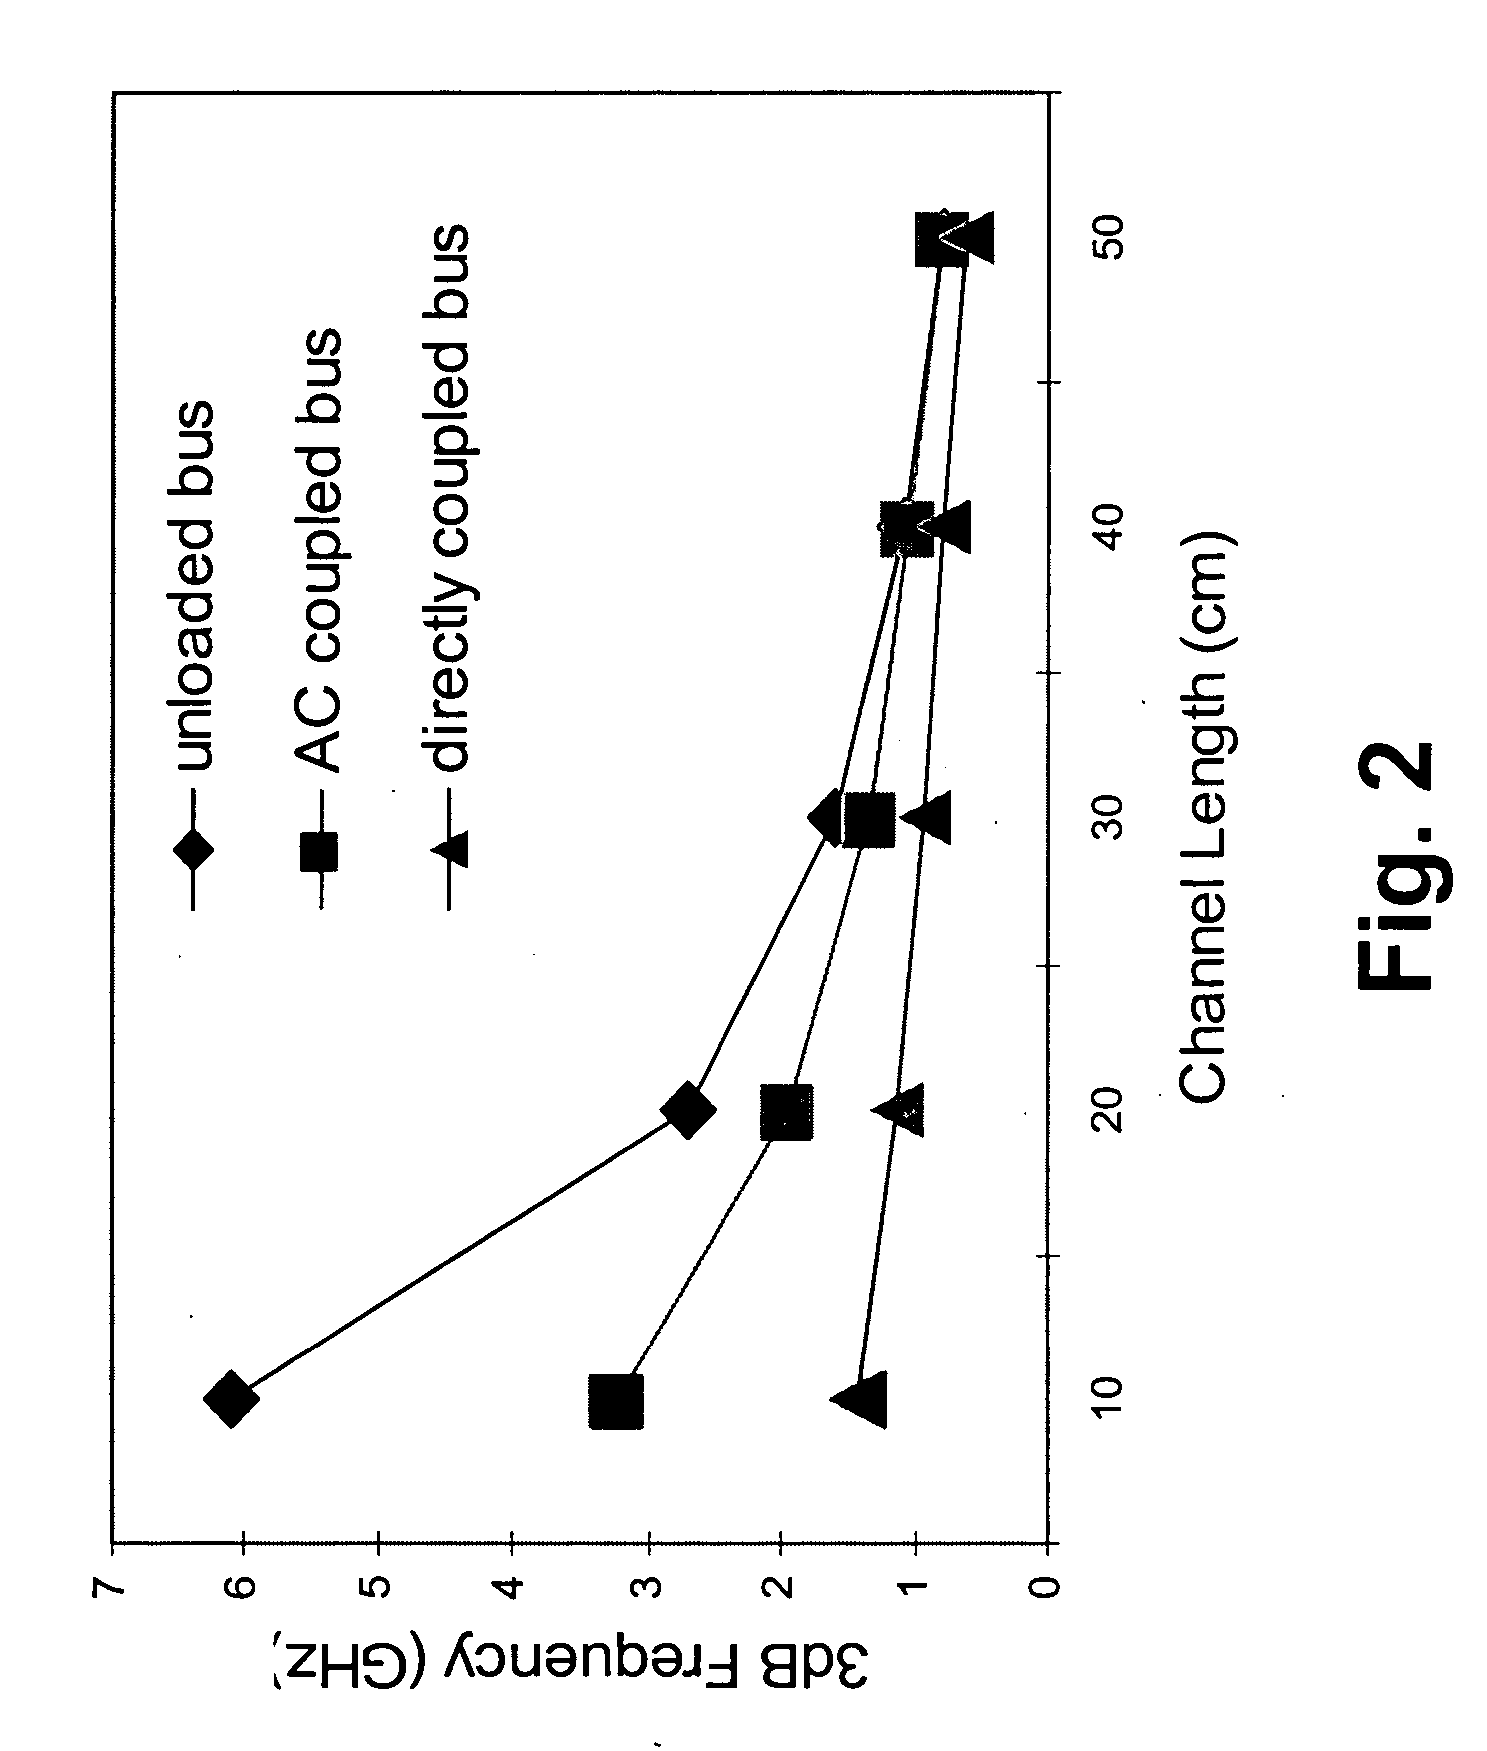 Capacitively coupled pulsed signaling bus interface